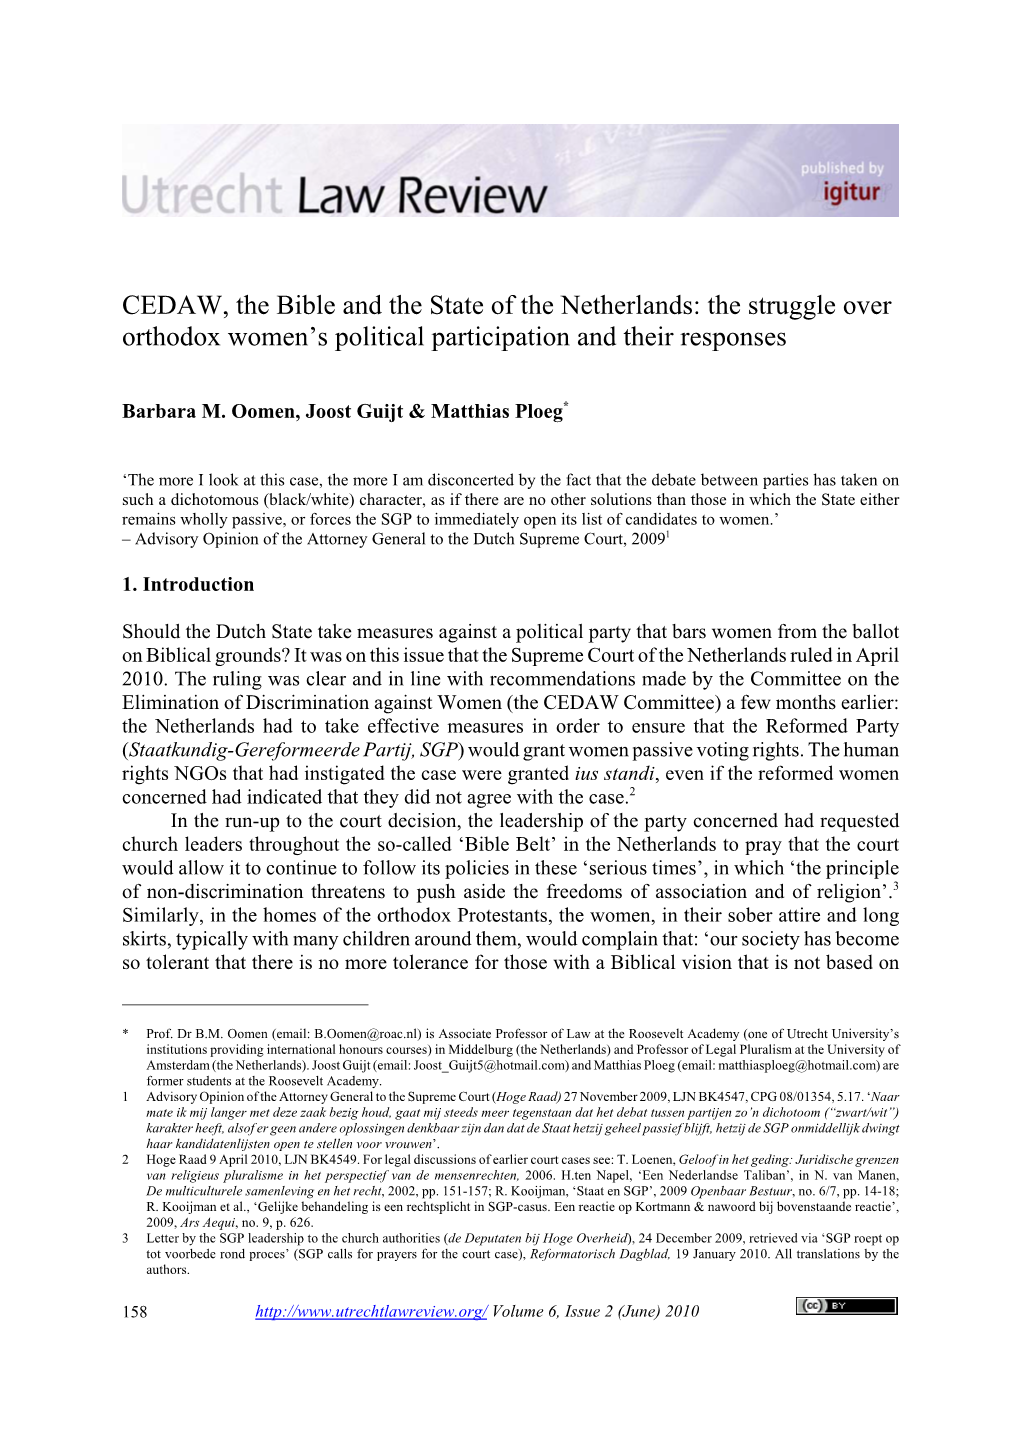 CEDAW, the Bible and the State of the Netherlands: the Struggle Over Orthodox Women’S Political Participation and Their Responses